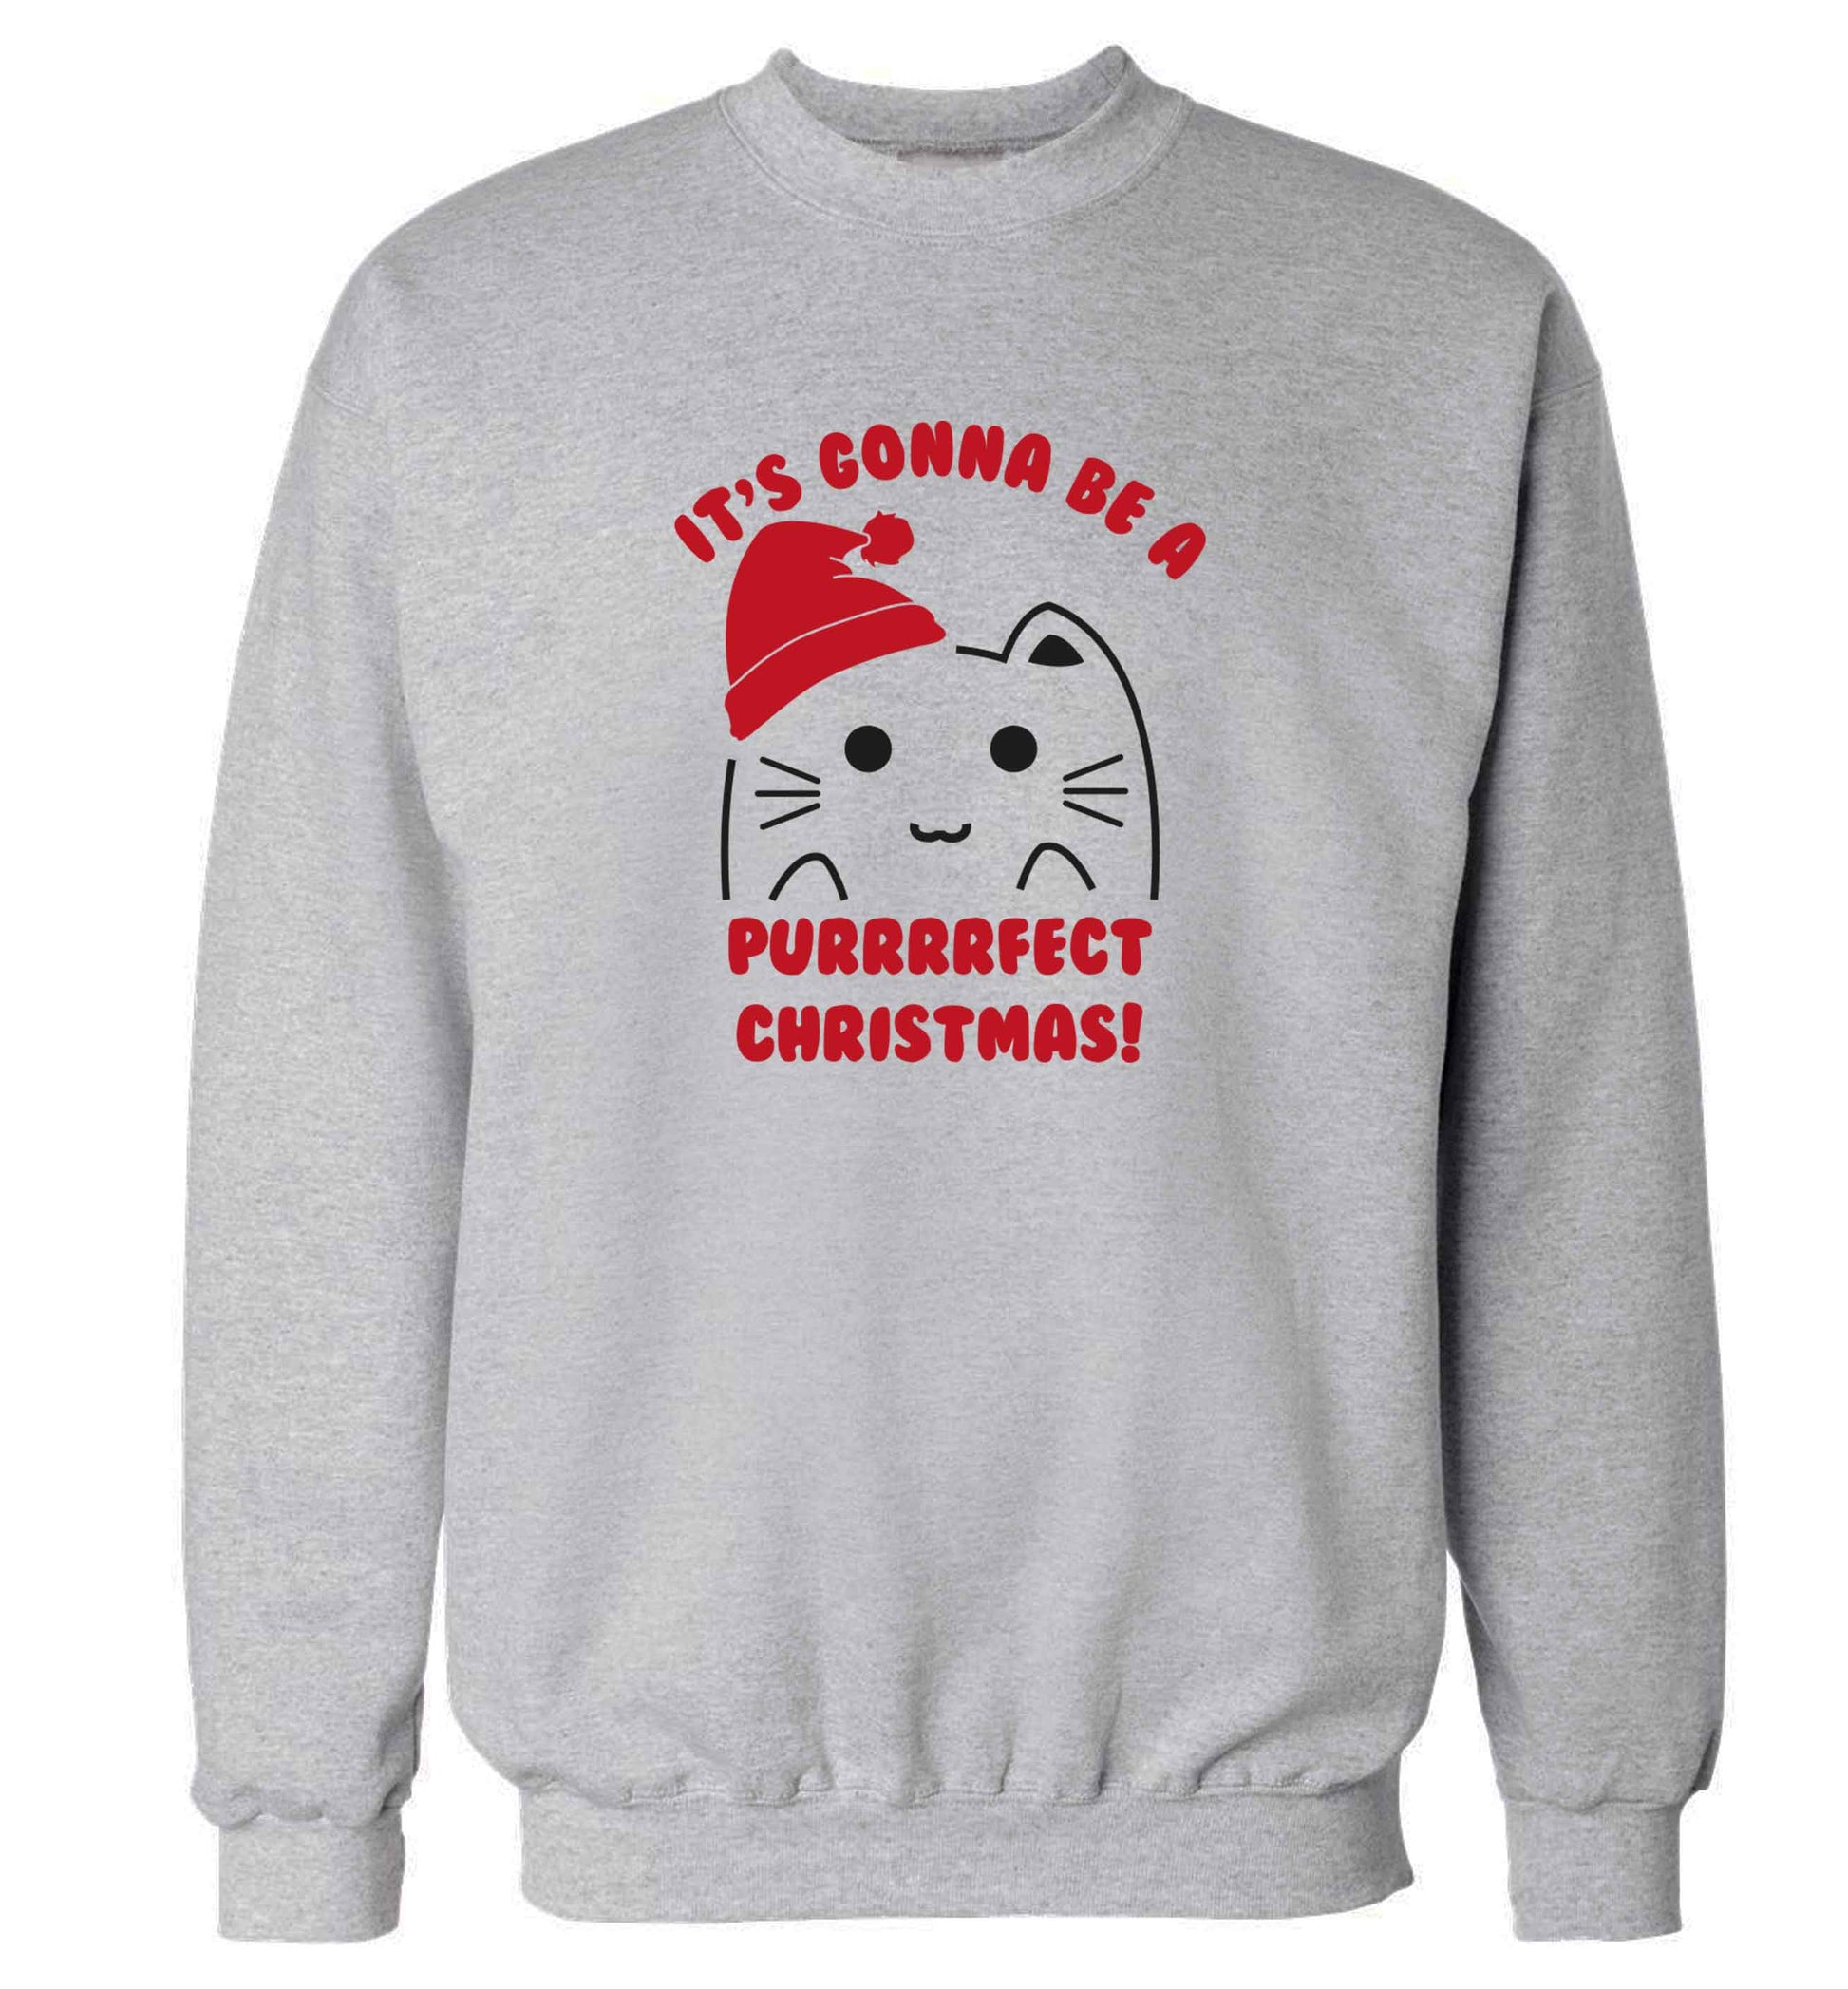 It's going to be a purrfect Christmas adult's unisex grey sweater 2XL